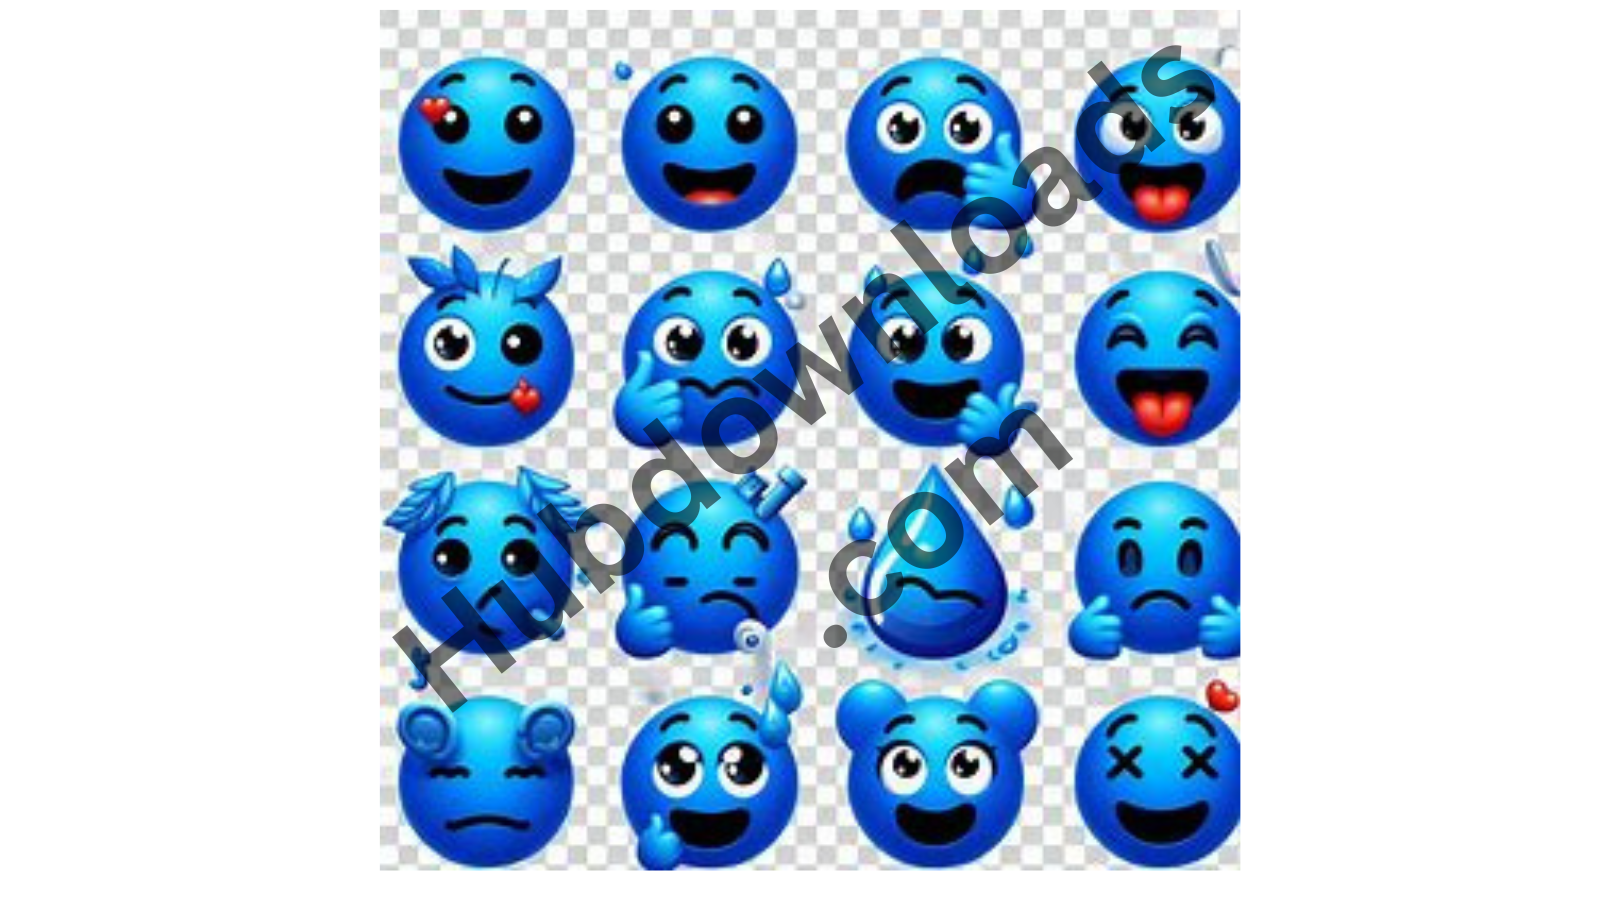 A grid of 16 blue emoji faces displaying various emotions, including happy, sad, silly, surprised, angry, and anxious.